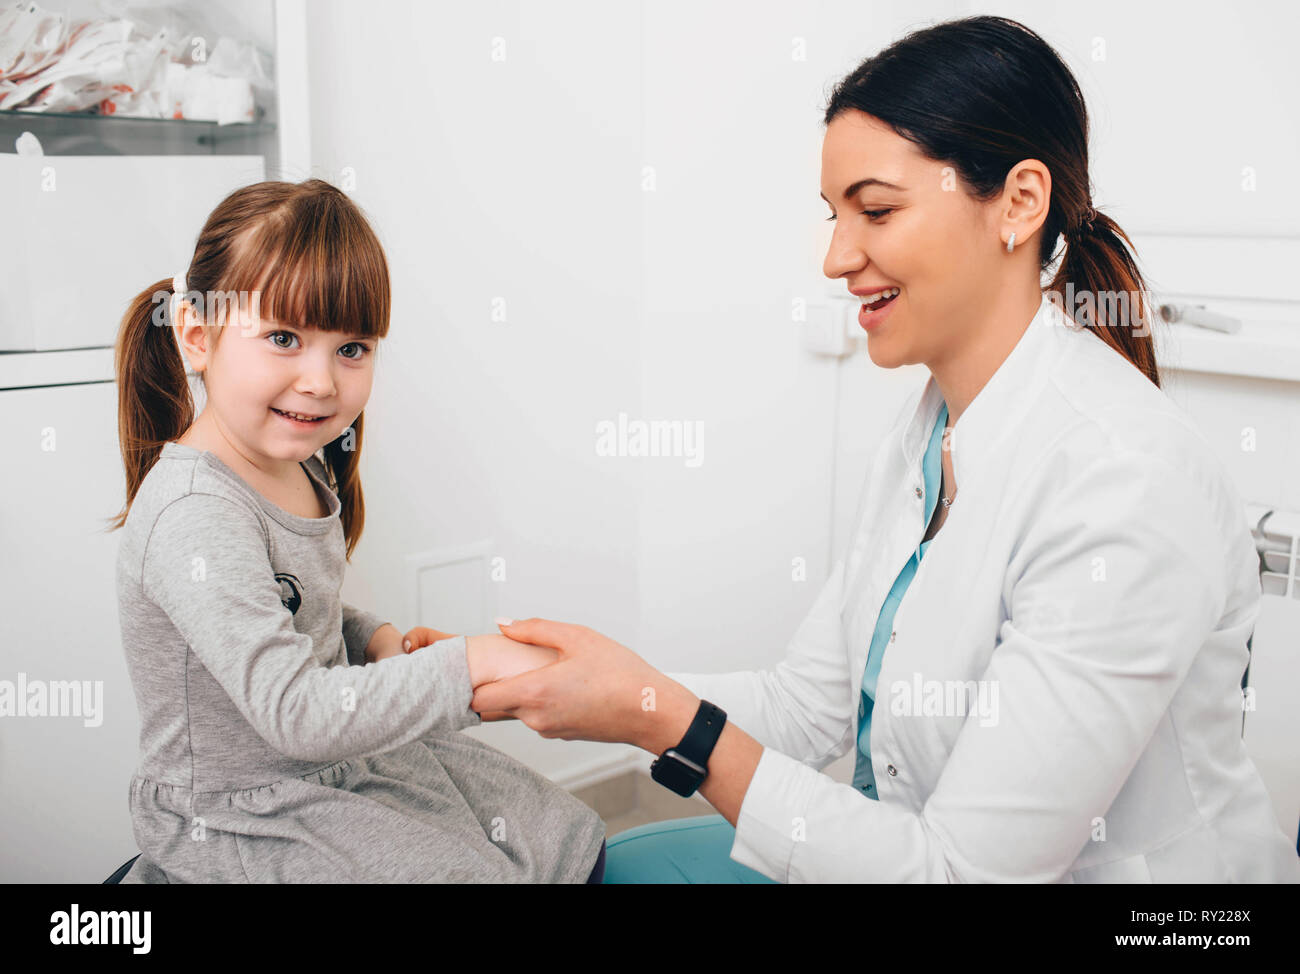 Cheerful pediatrician greets a little patient's. Doctor holding child's hand in comfort Stock Photo